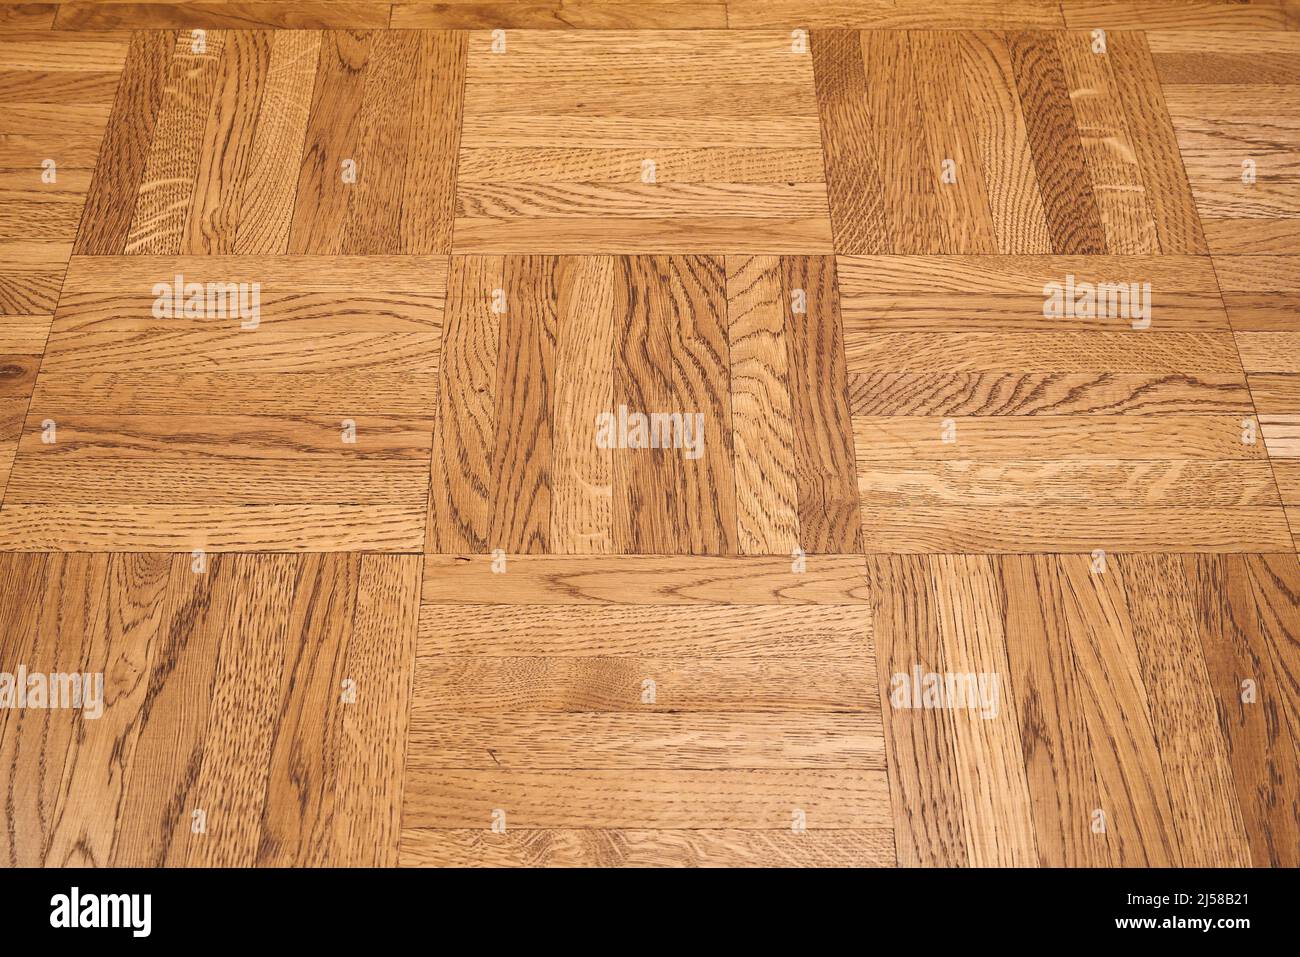 Mosaic wooden surface from parquet or table Stock Photo